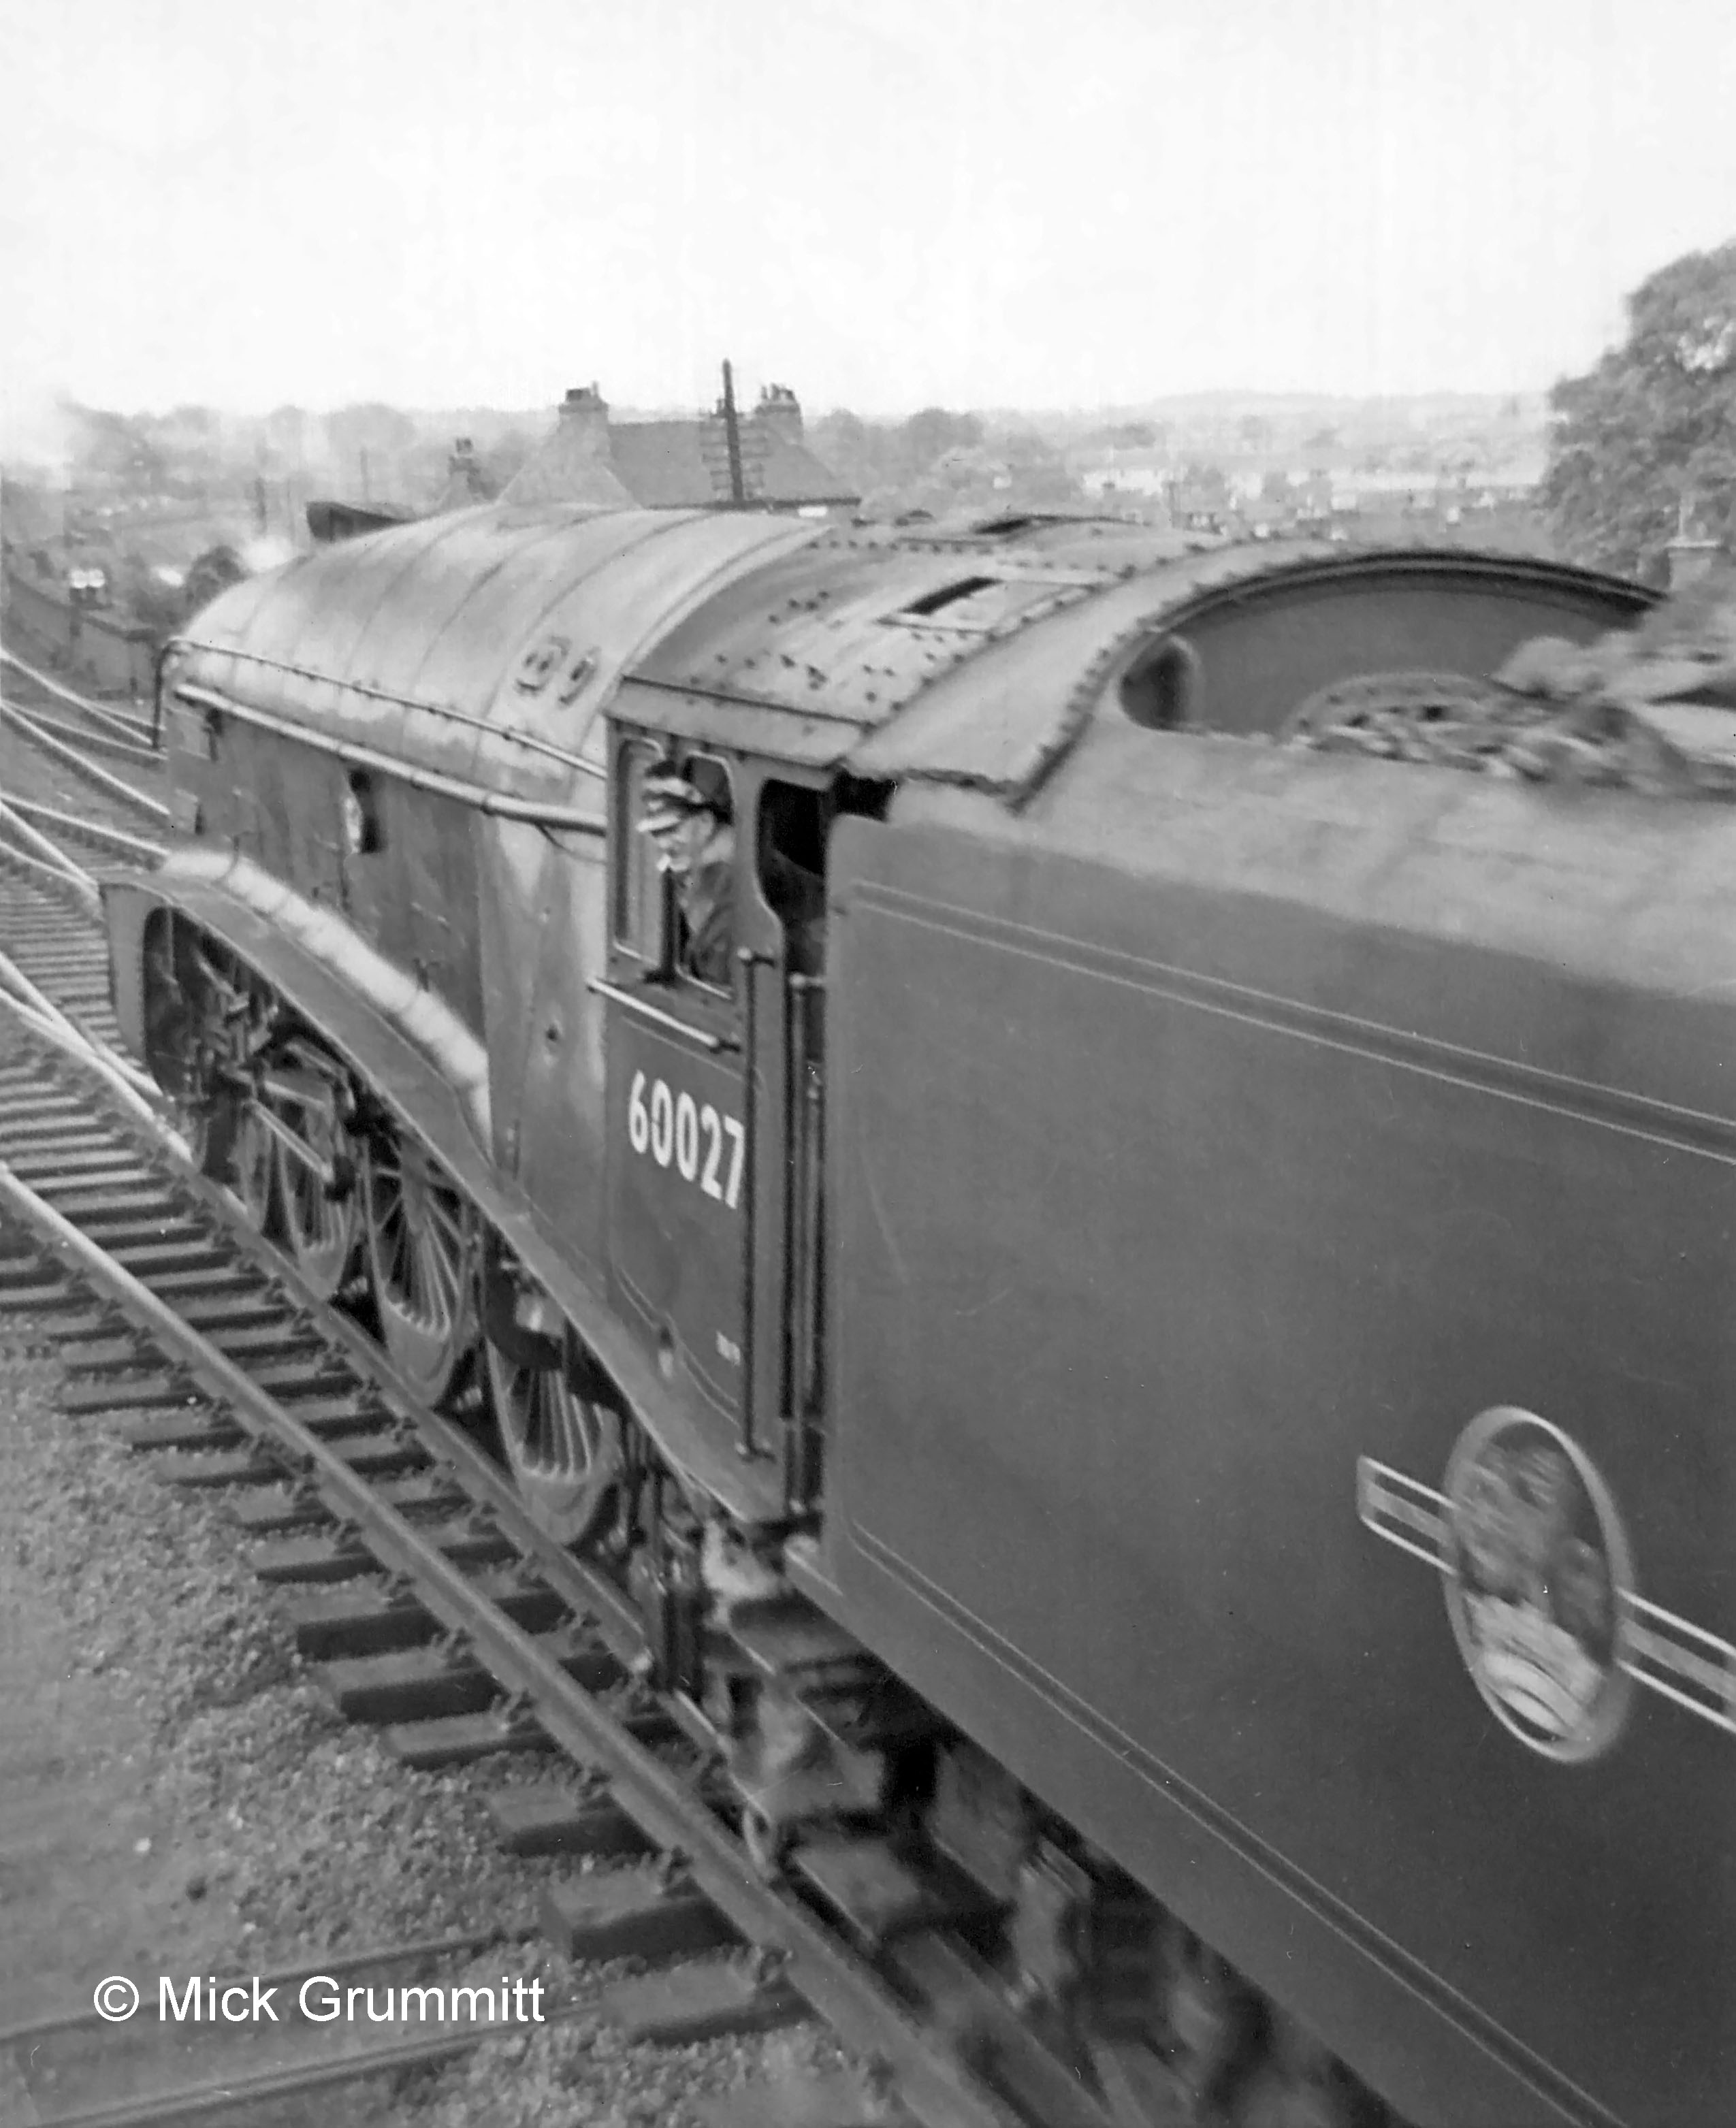 Passing the box windows with a departing northbound train on the Down Main line is No.60027 Merlin. Mick Grummitt who took this photograph recalls that this was the Down Elizabethan which was scheduled non-stop between London and Edinburgh, taking water at troughs en route. On this occasion the crew had stopped for water at Grantham because they had a ‘poor dip’ at Langley troughs near Stevenage (probably because the troughs hadn’t had time to refill fully after the previous train) and the following troughs at Werrington, north of Peterborough, were out of use for maintenance work. They didn't want to risk the next troughs, at Muskham near Newark, being low as well. Mick remembers that the unexpected 'arrival' of a passenger train at the platform when none was due caused a bit of a panic among the station staff! Photograph by Mick Grummitt, relief Telegraph Lad at Grantham North 1959-62.